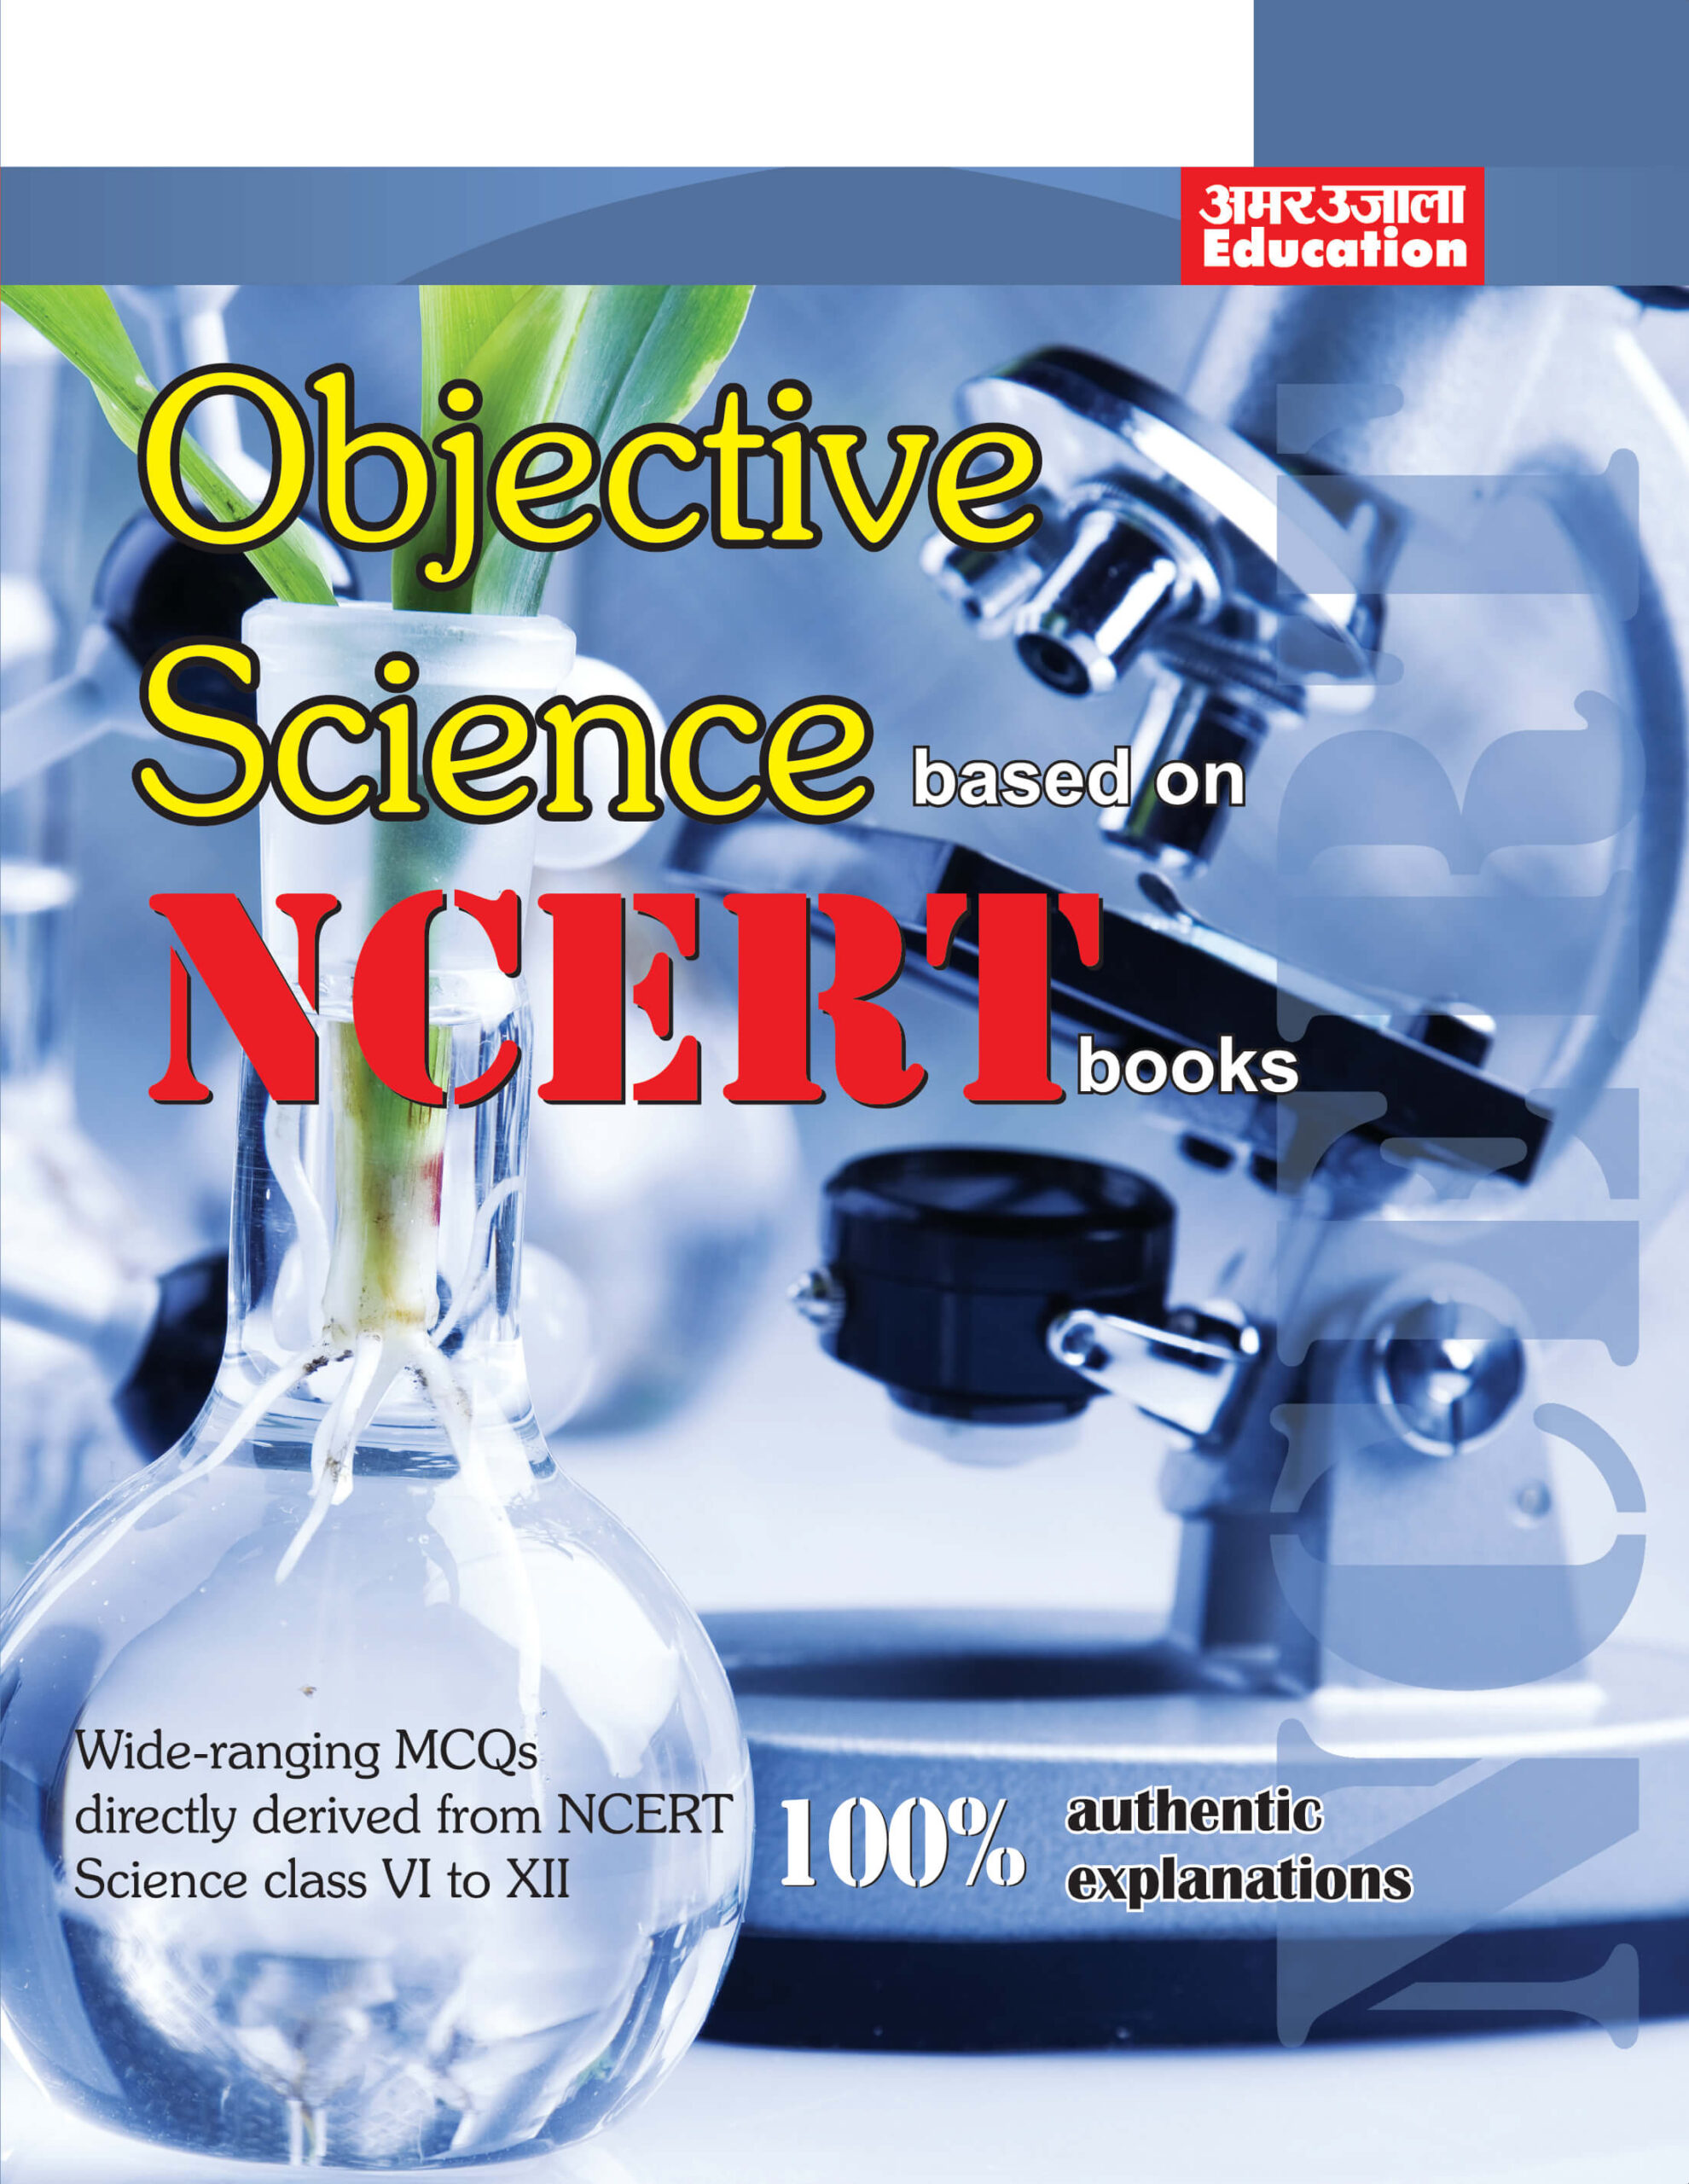 NCERT Objective Science (English)